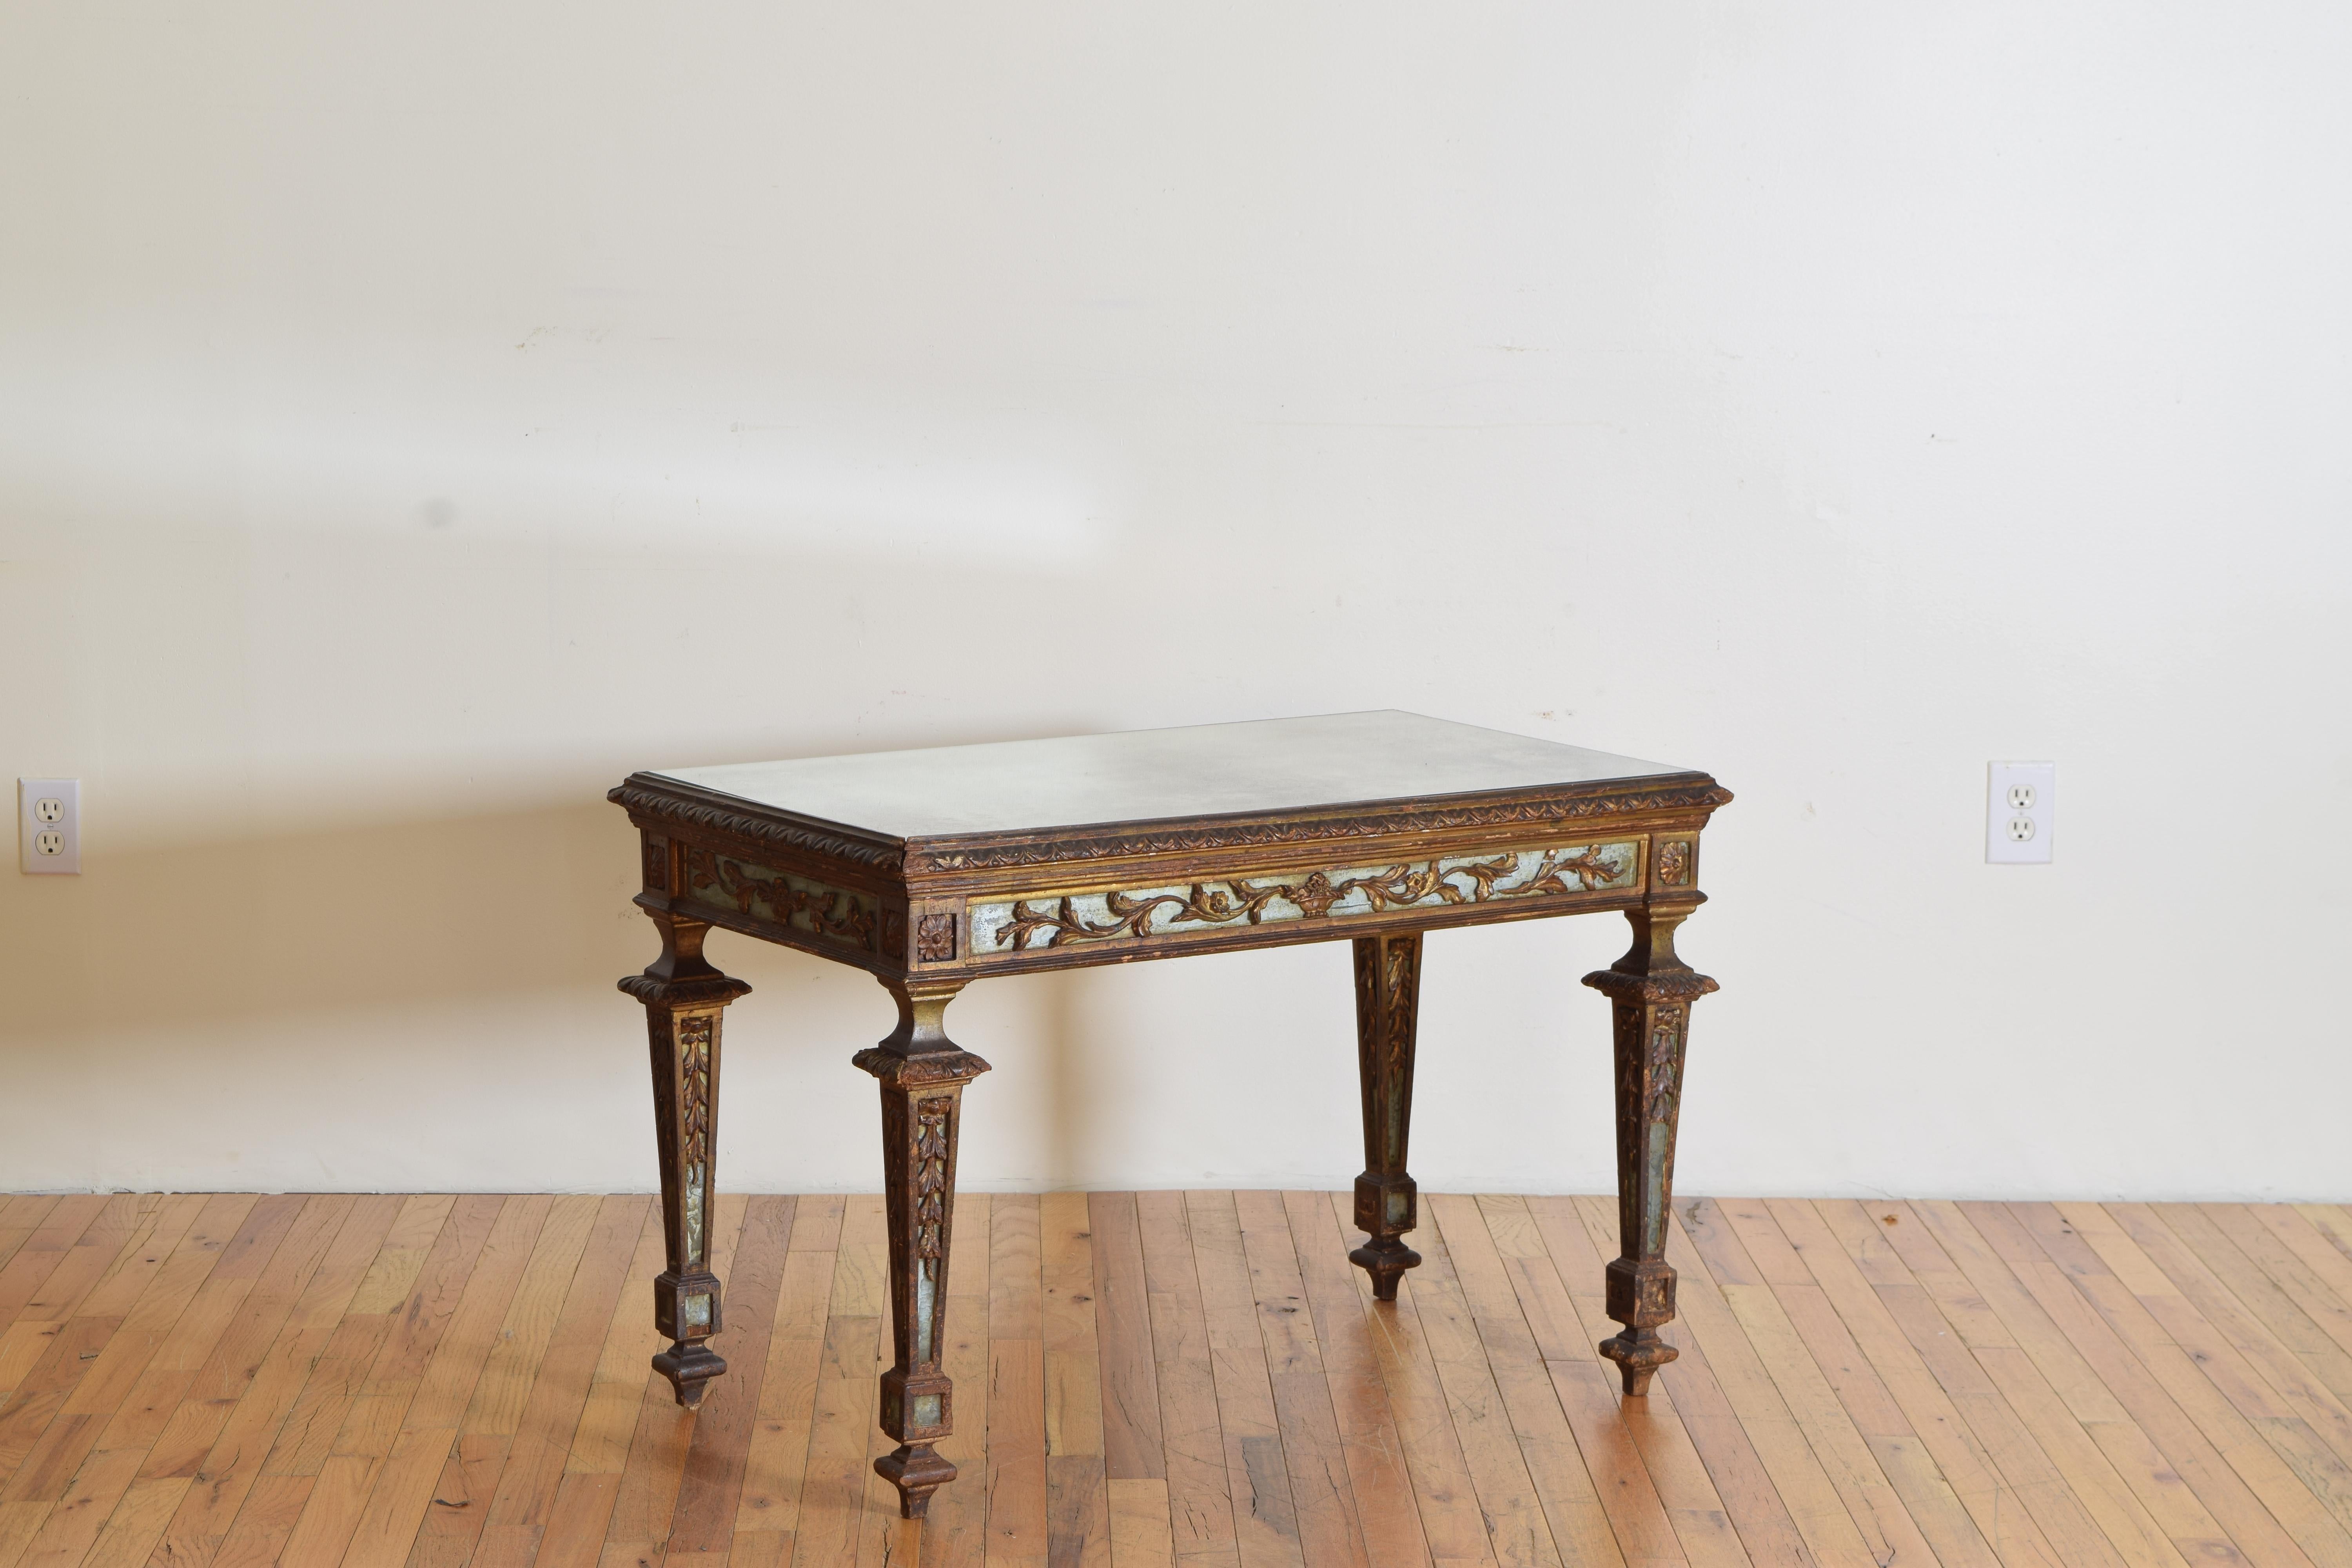 Italian hand-carved gilded and Painted with inset mirrored glass and a newly antiqued mirrored glass top.